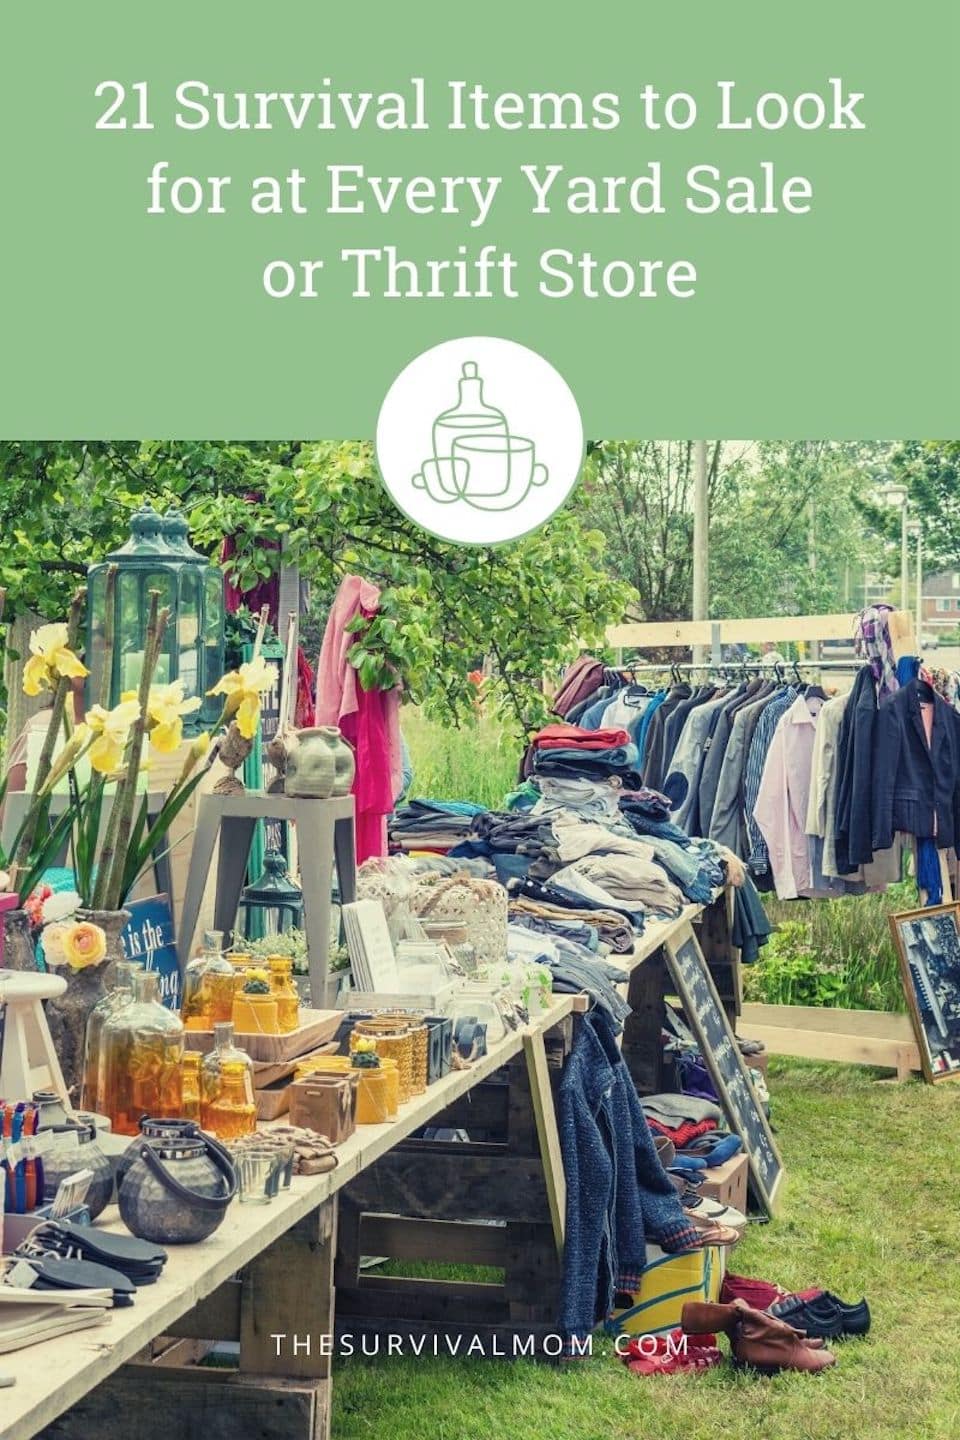 21 Survival Items to Look For at Every Yard Sale and Thrift Store